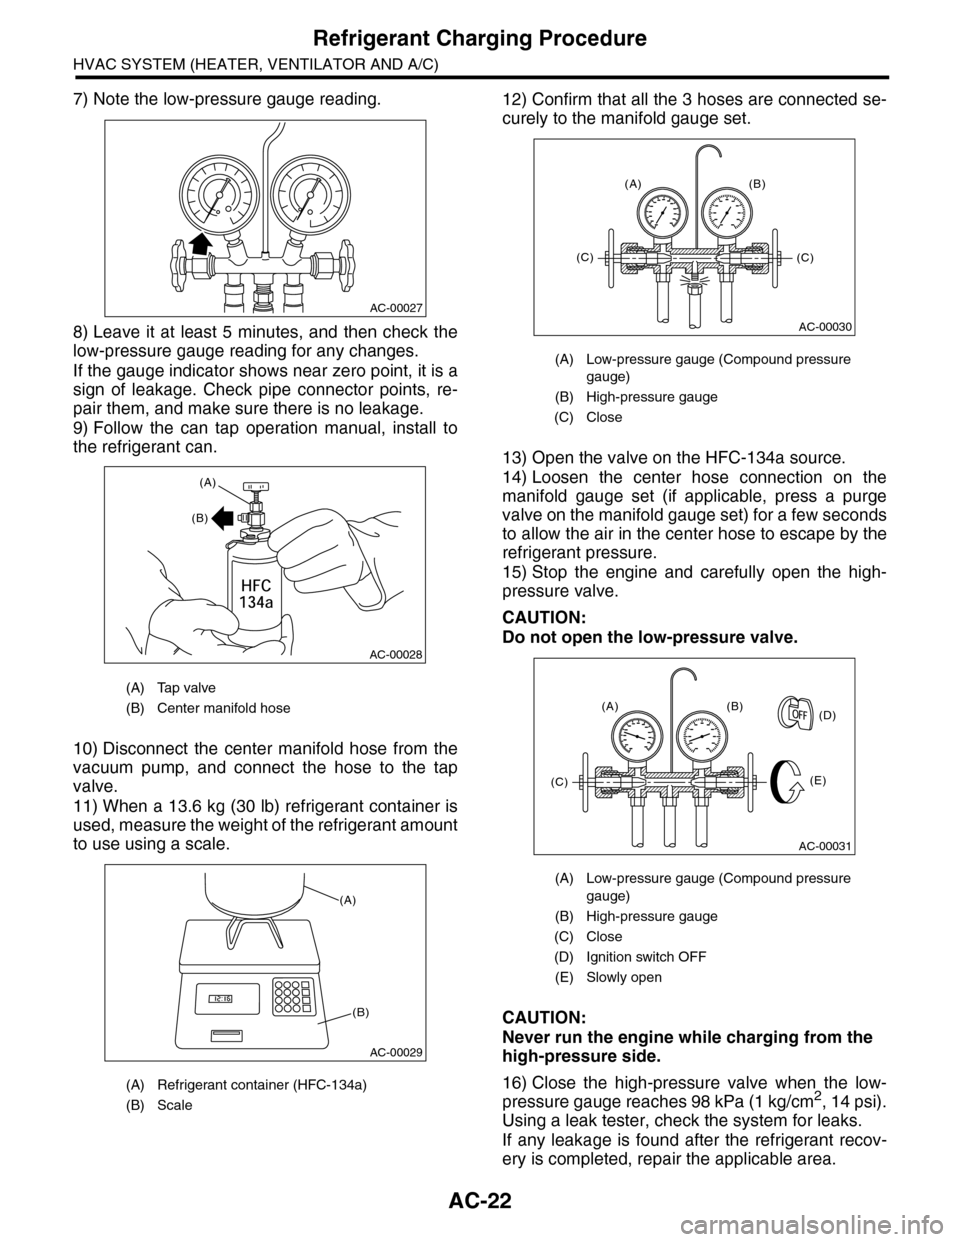 SUBARU TRIBECA 2009 1.G Service Workshop Manual AC-22
Refrigerant Charging Procedure
HVAC SYSTEM (HEATER, VENTILATOR AND A/C)
7) Note the low-pressure gauge reading.
8) Leave it  at  least 5  minutes,  and  then check the
low-pressure gauge reading